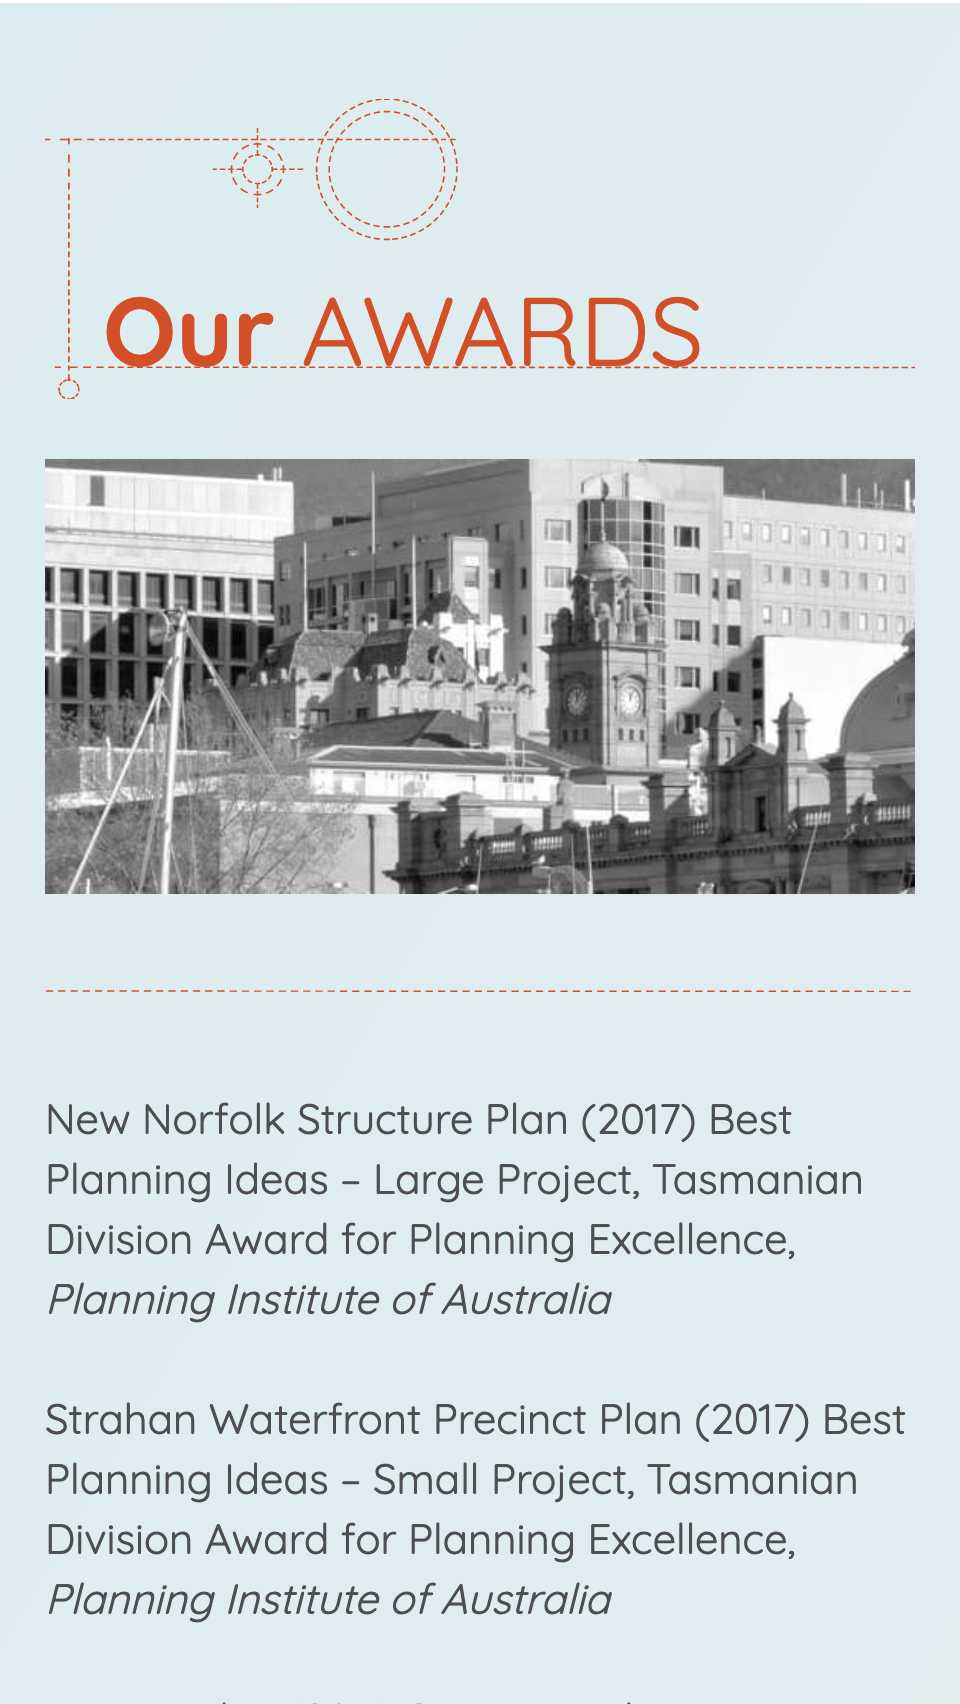 Screenshot of the ERA Planning project on a phone